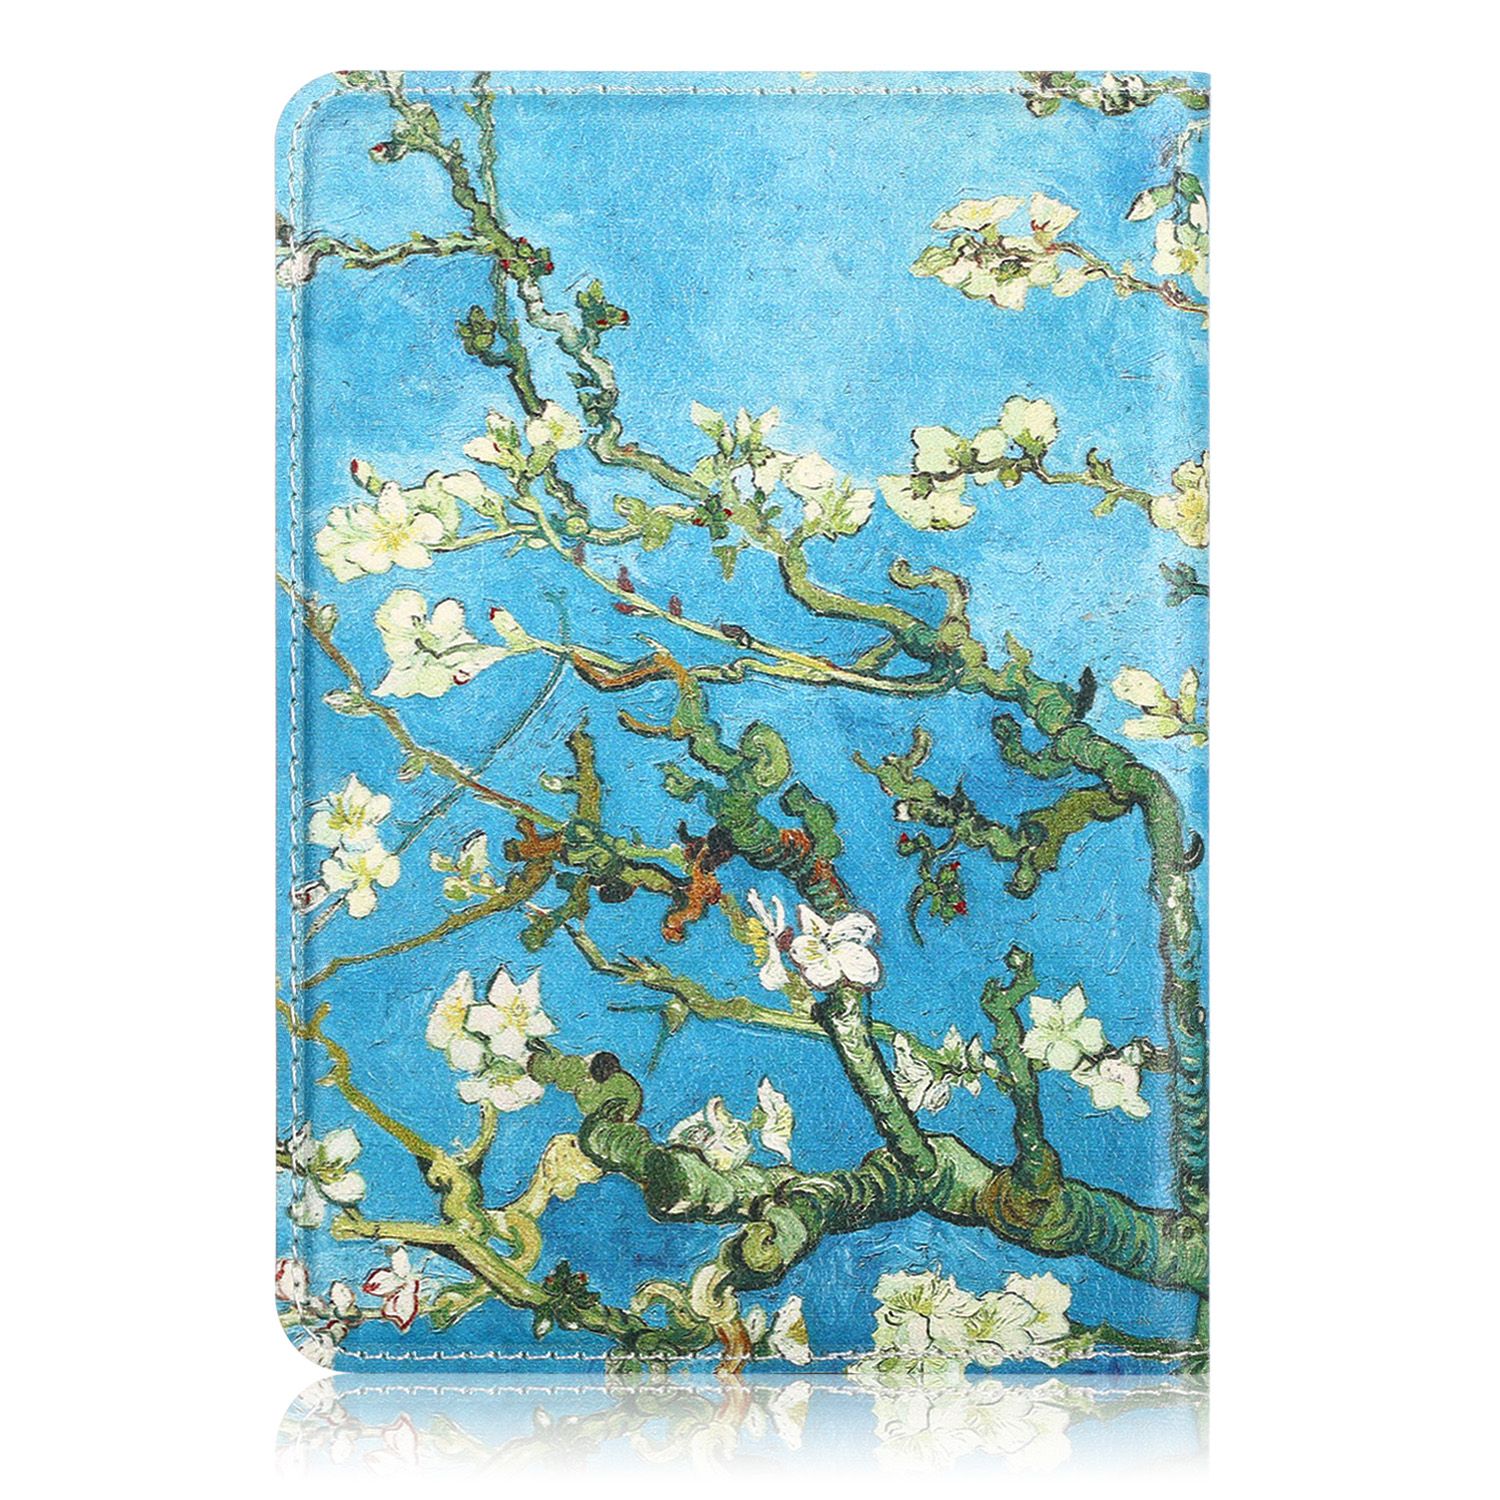 Printing-Passport-Tablet-Case-Cover---Apricot-Blossom-1591425